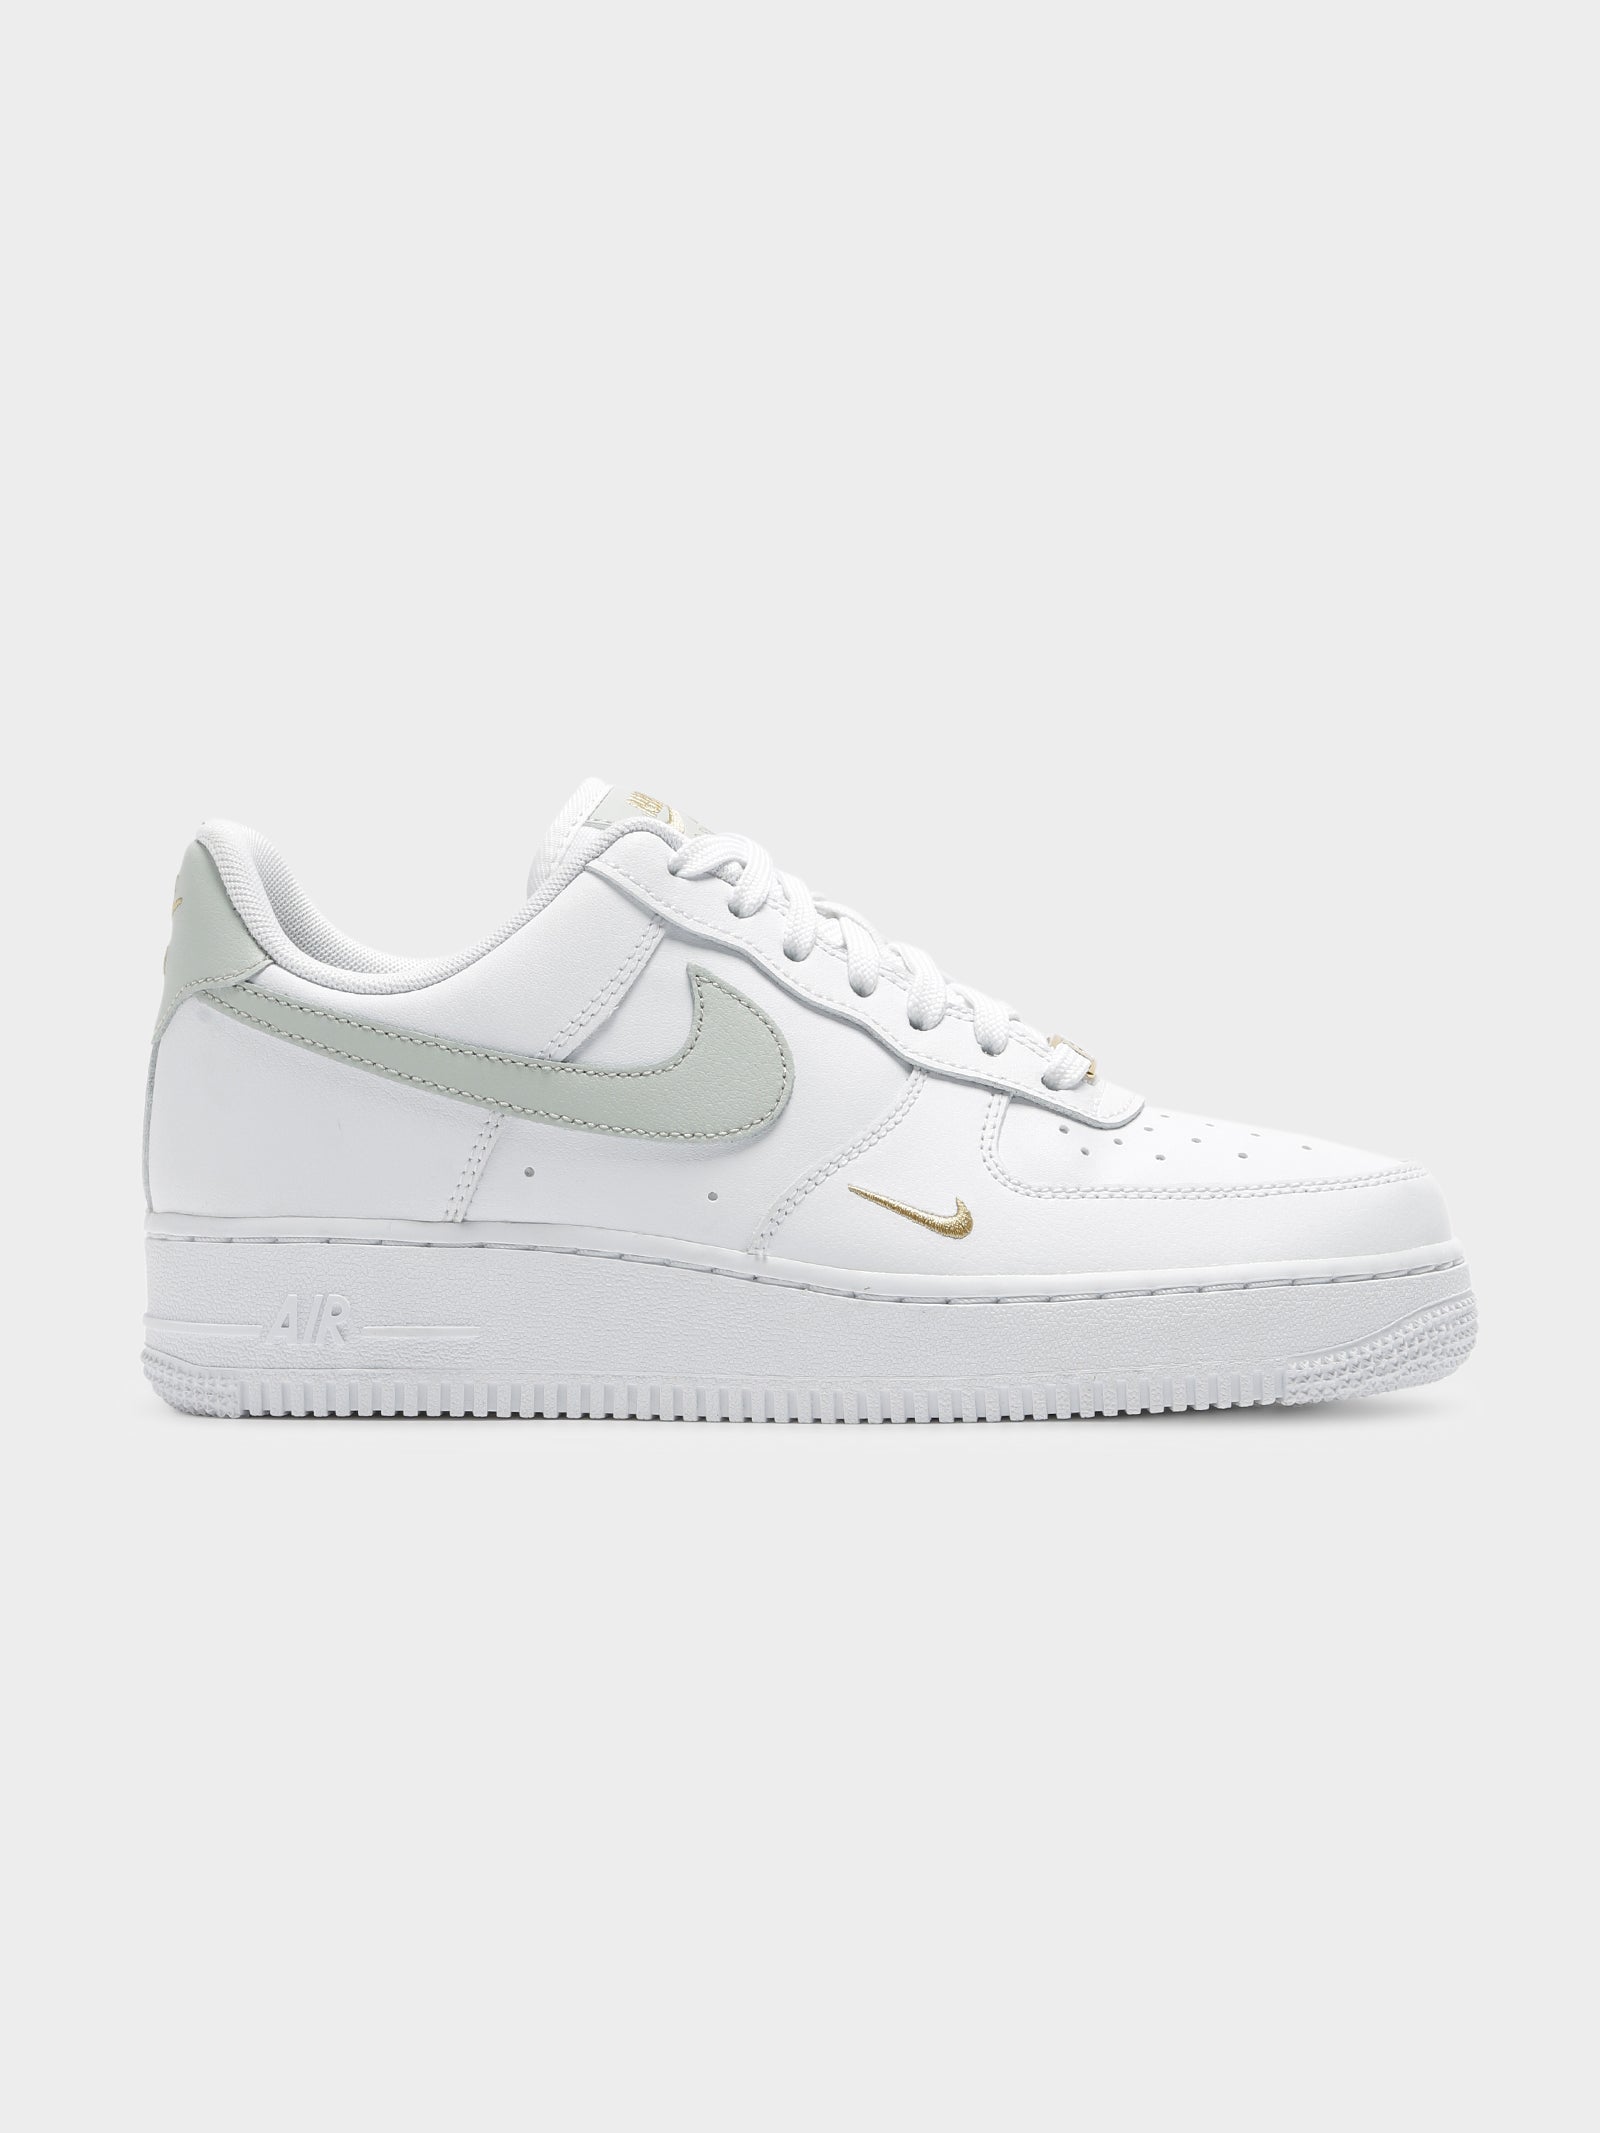 white nike air force 1 with grey tick